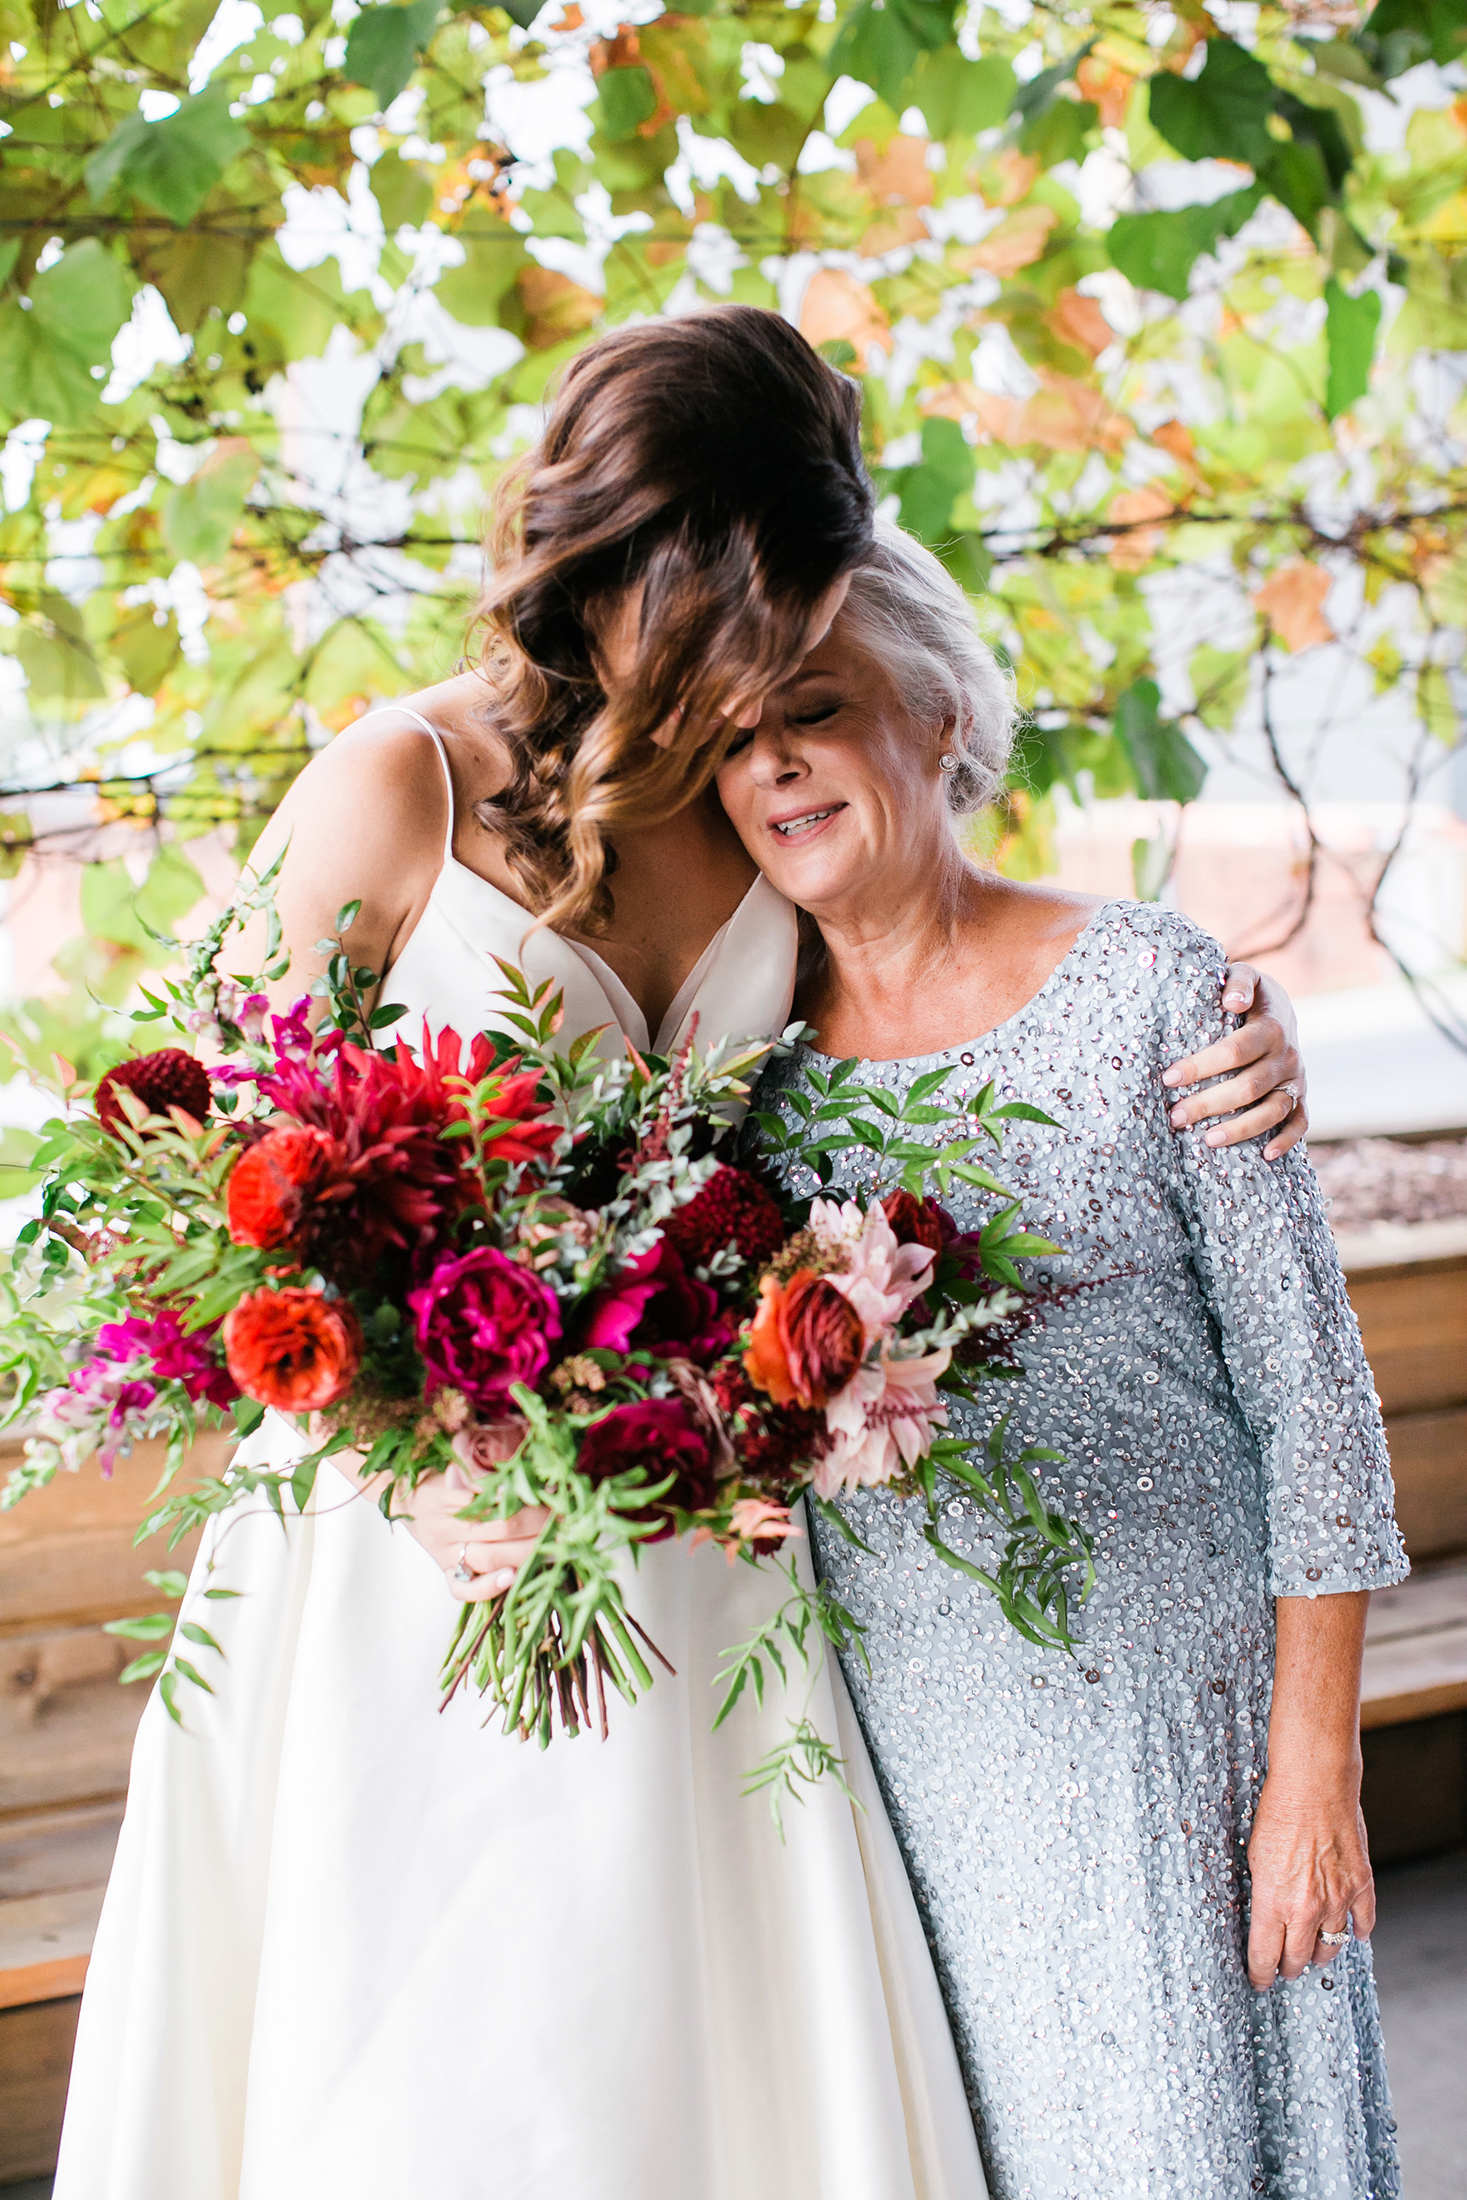 Burgundy and blush bridal bouquet with dahlias, garden roses, and greenery // Tennessee Wedding Floral Design